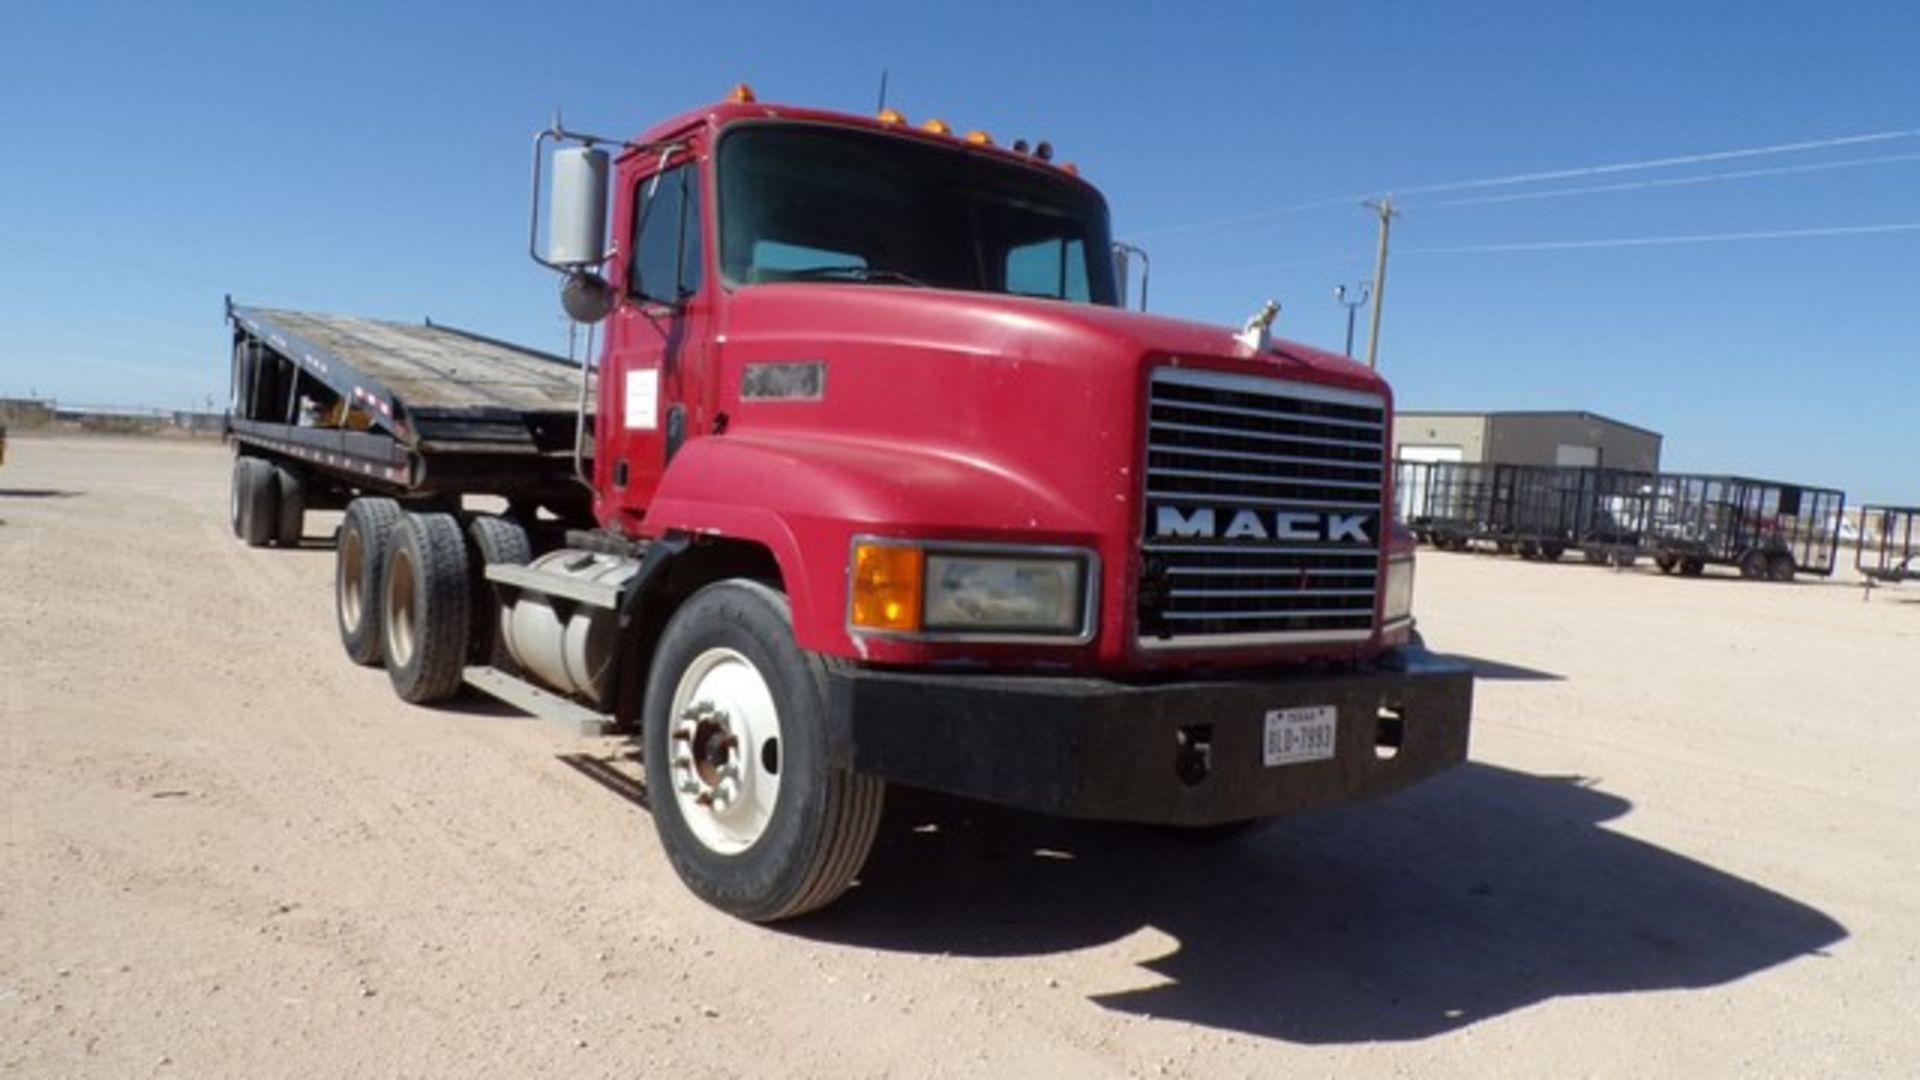 Located in YARD 1 - Midland, TX (6339) 1996 MACK CH613 T/A DAY CAB HAUL TRUCK, VIN- - Image 2 of 9